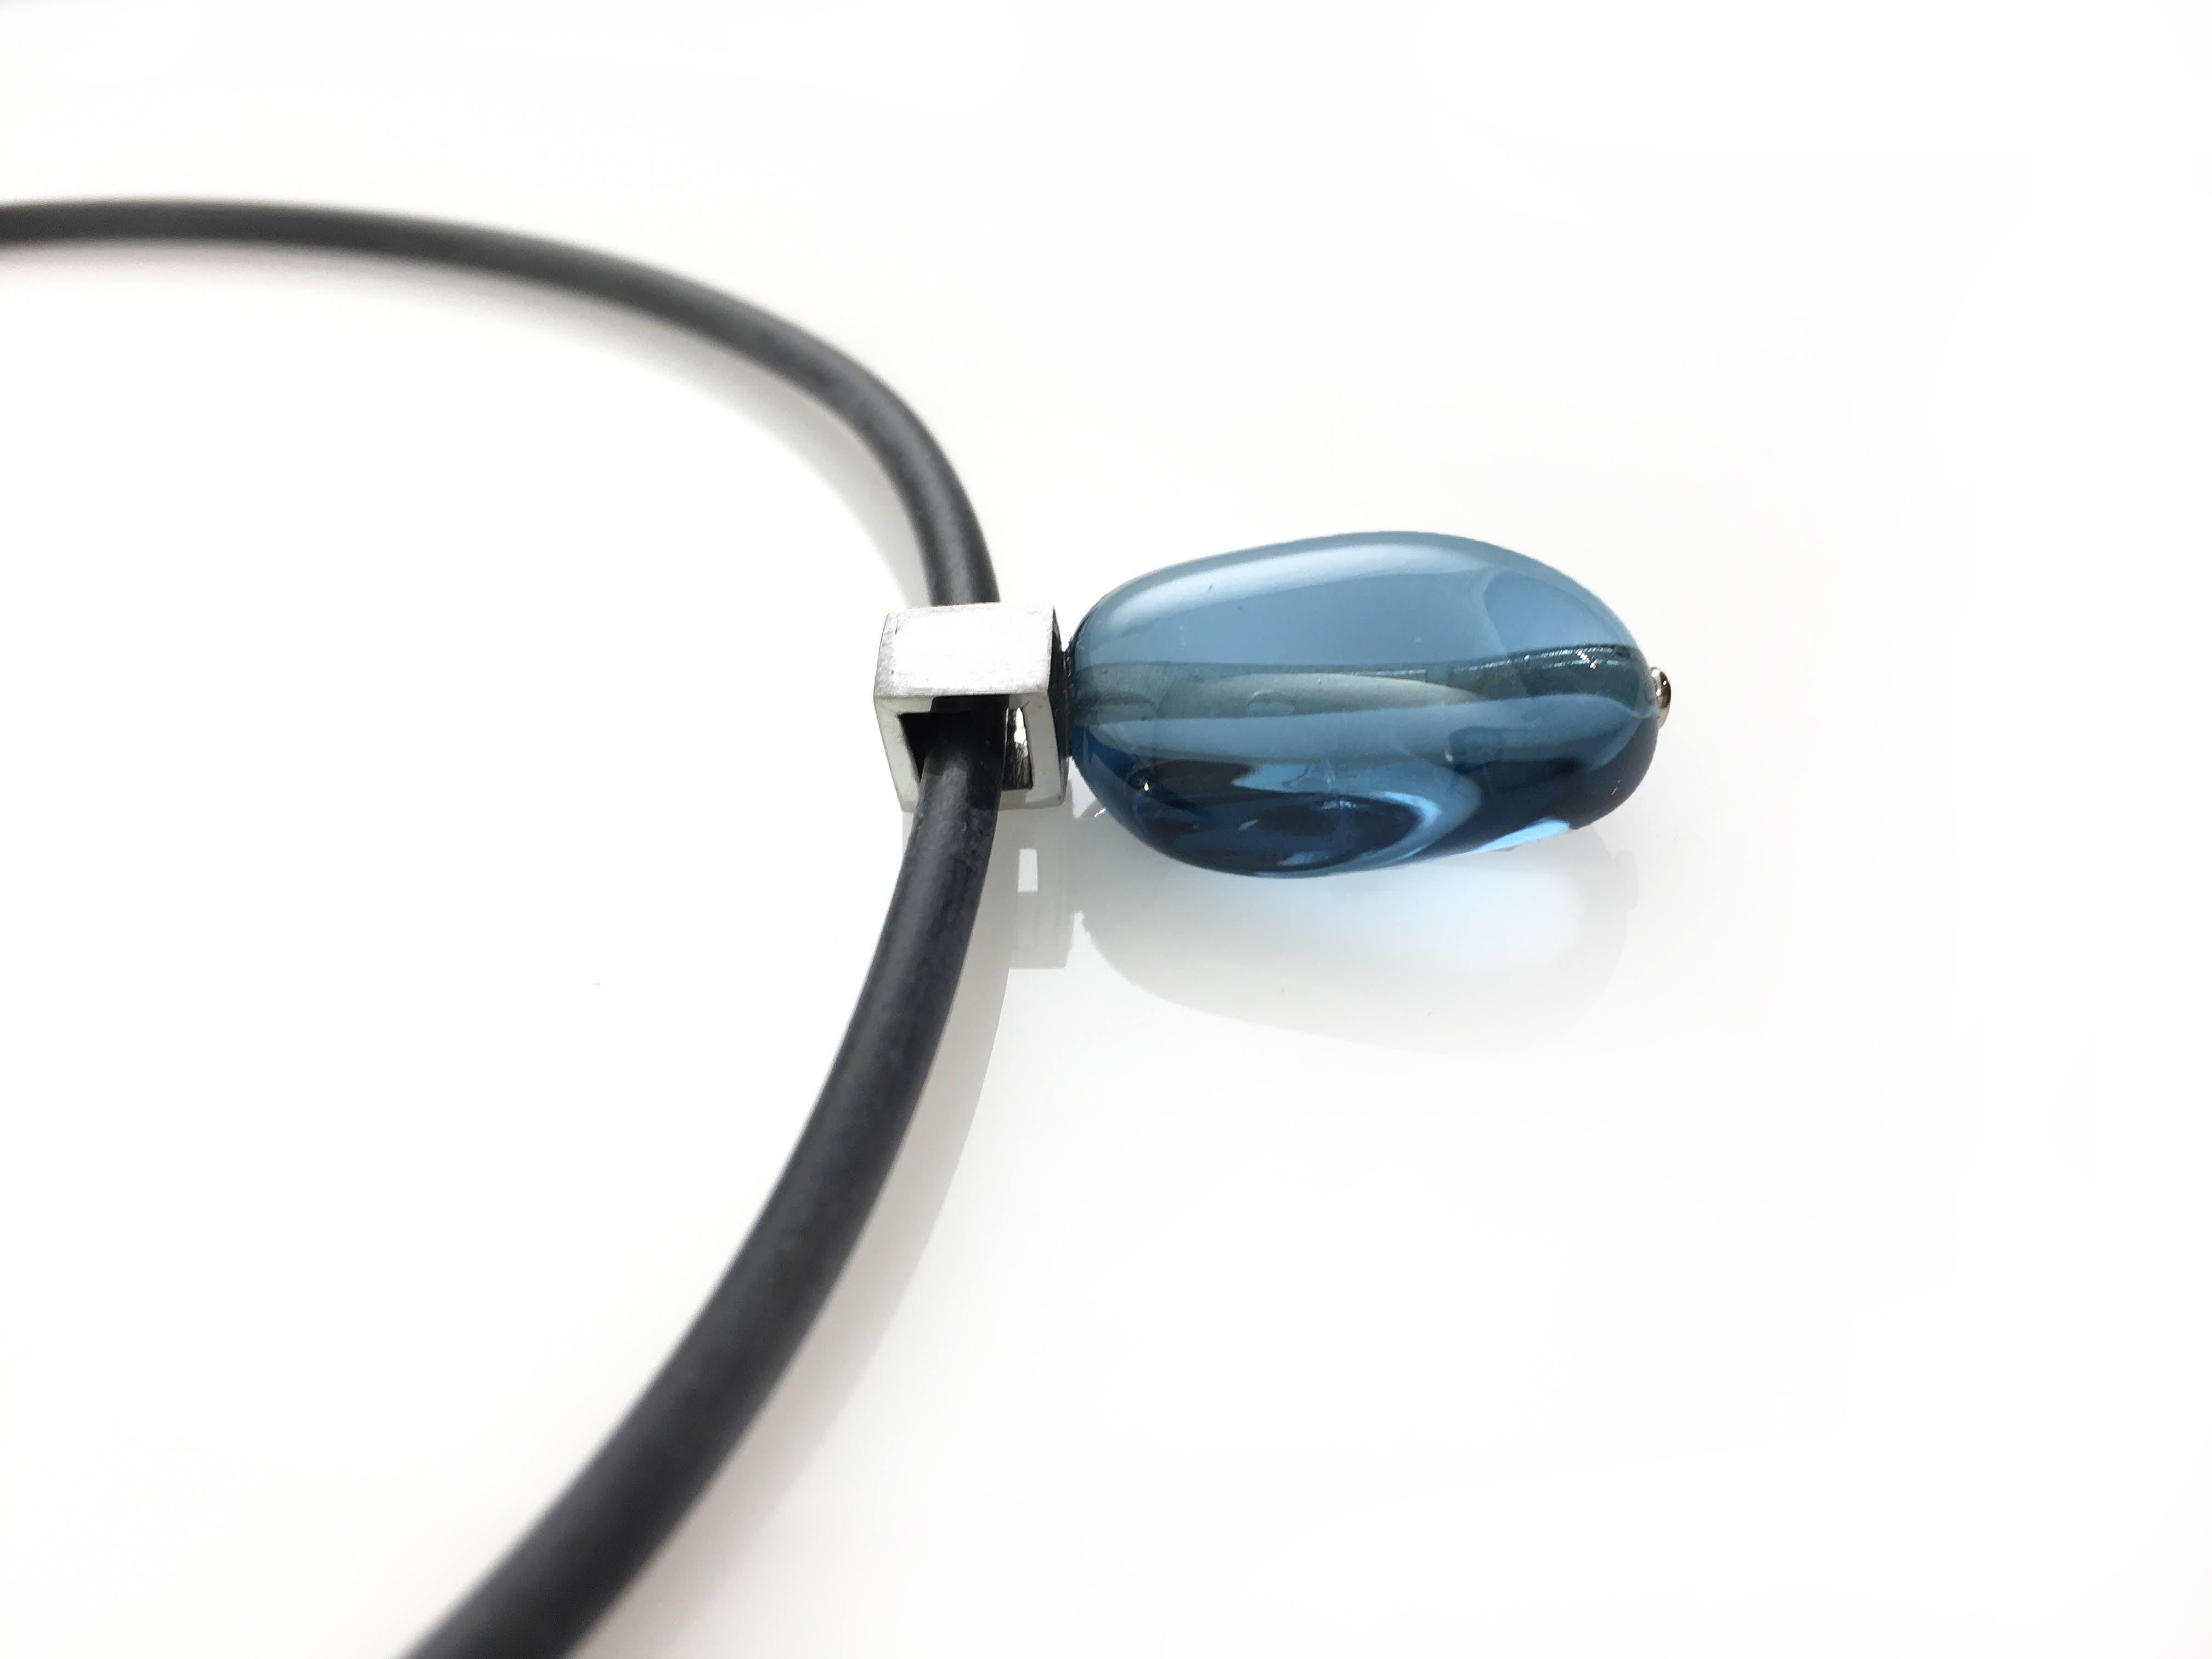 Contemporary White Gold Bail with Blue Topaz Pendant